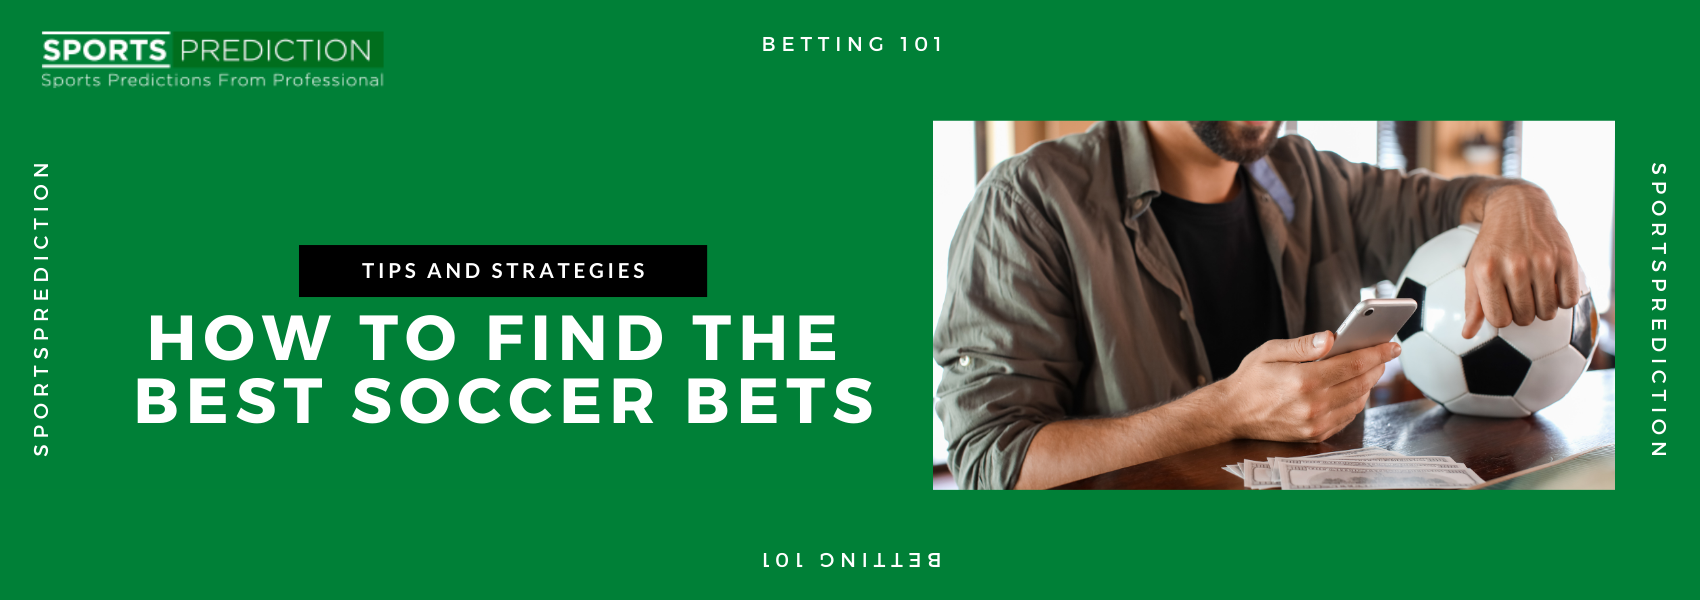 How To Find The Best Soccer Bets: Tips And Strategies